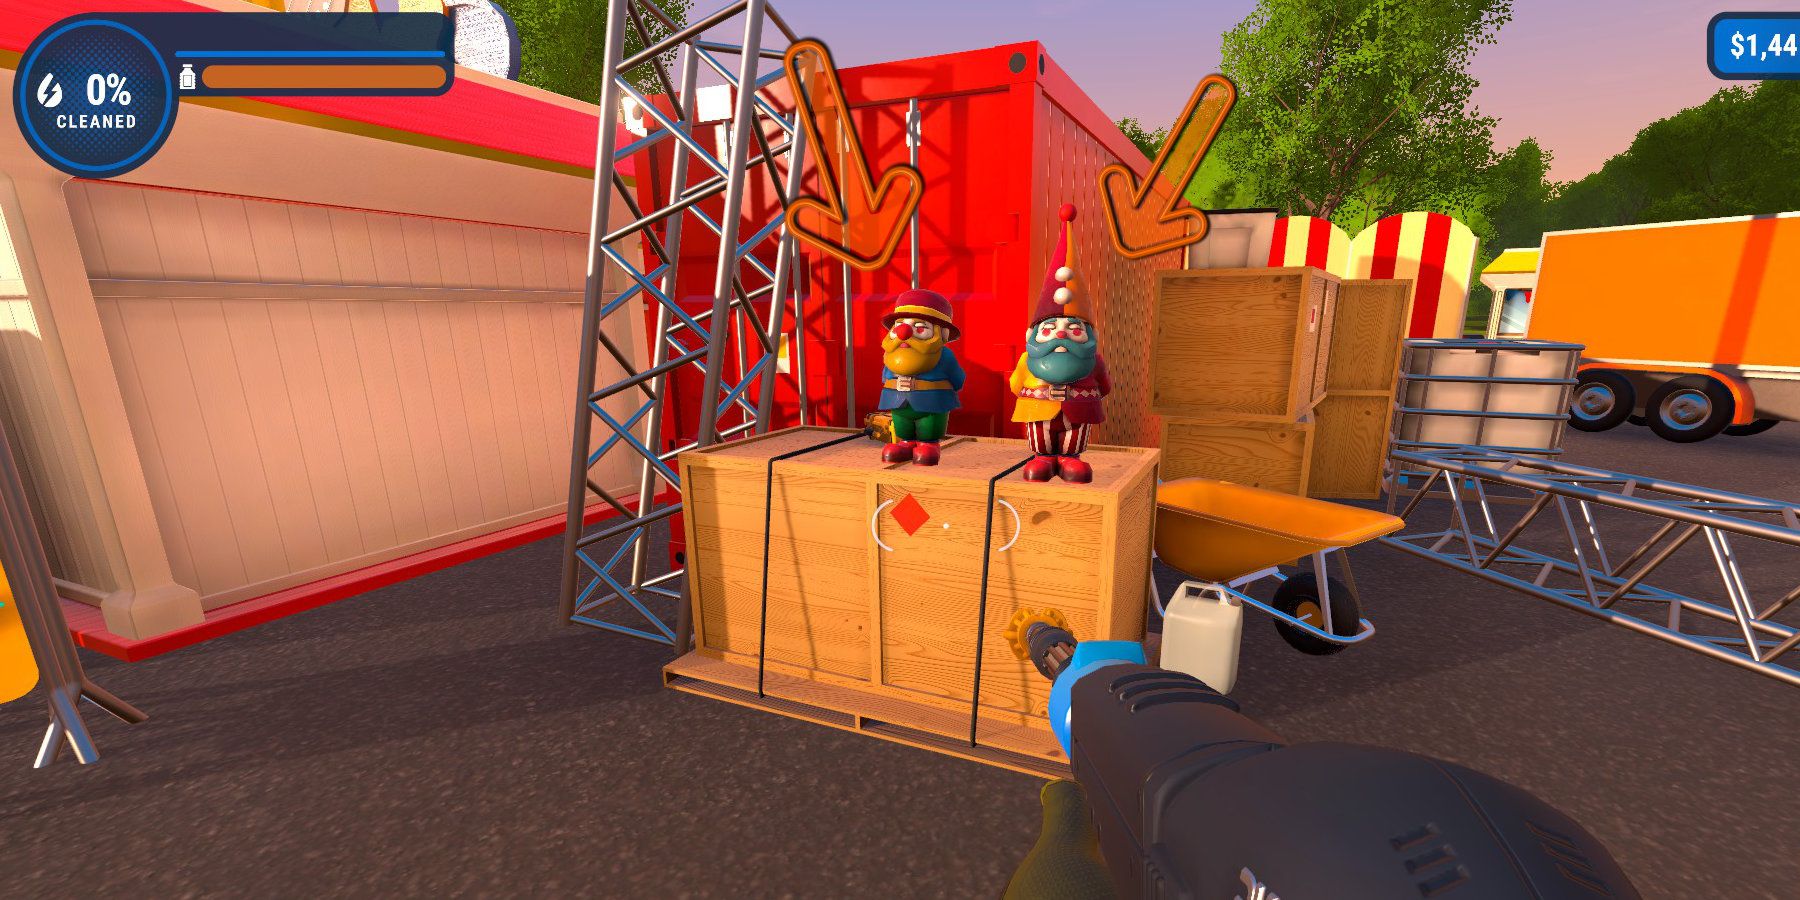 Two garden gnomes, dressed as clowns, on top of a crate, highlighted by arrows.